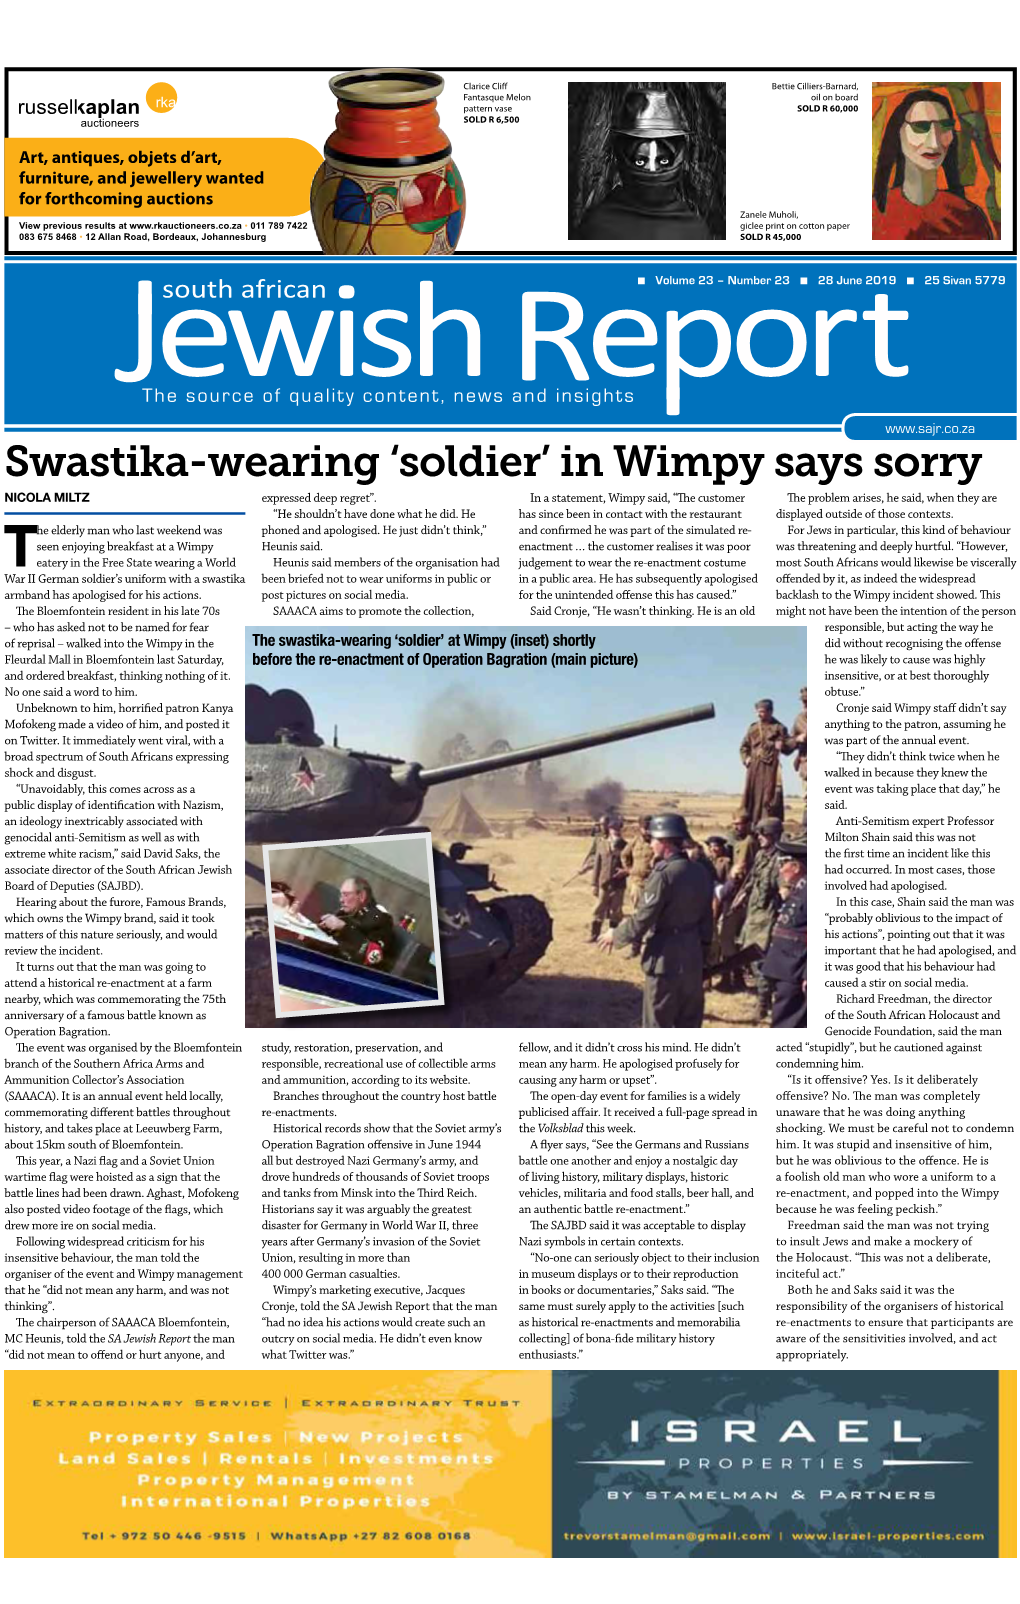 Swastika-Wearing 'Soldier' in Wimpy Says Sorry